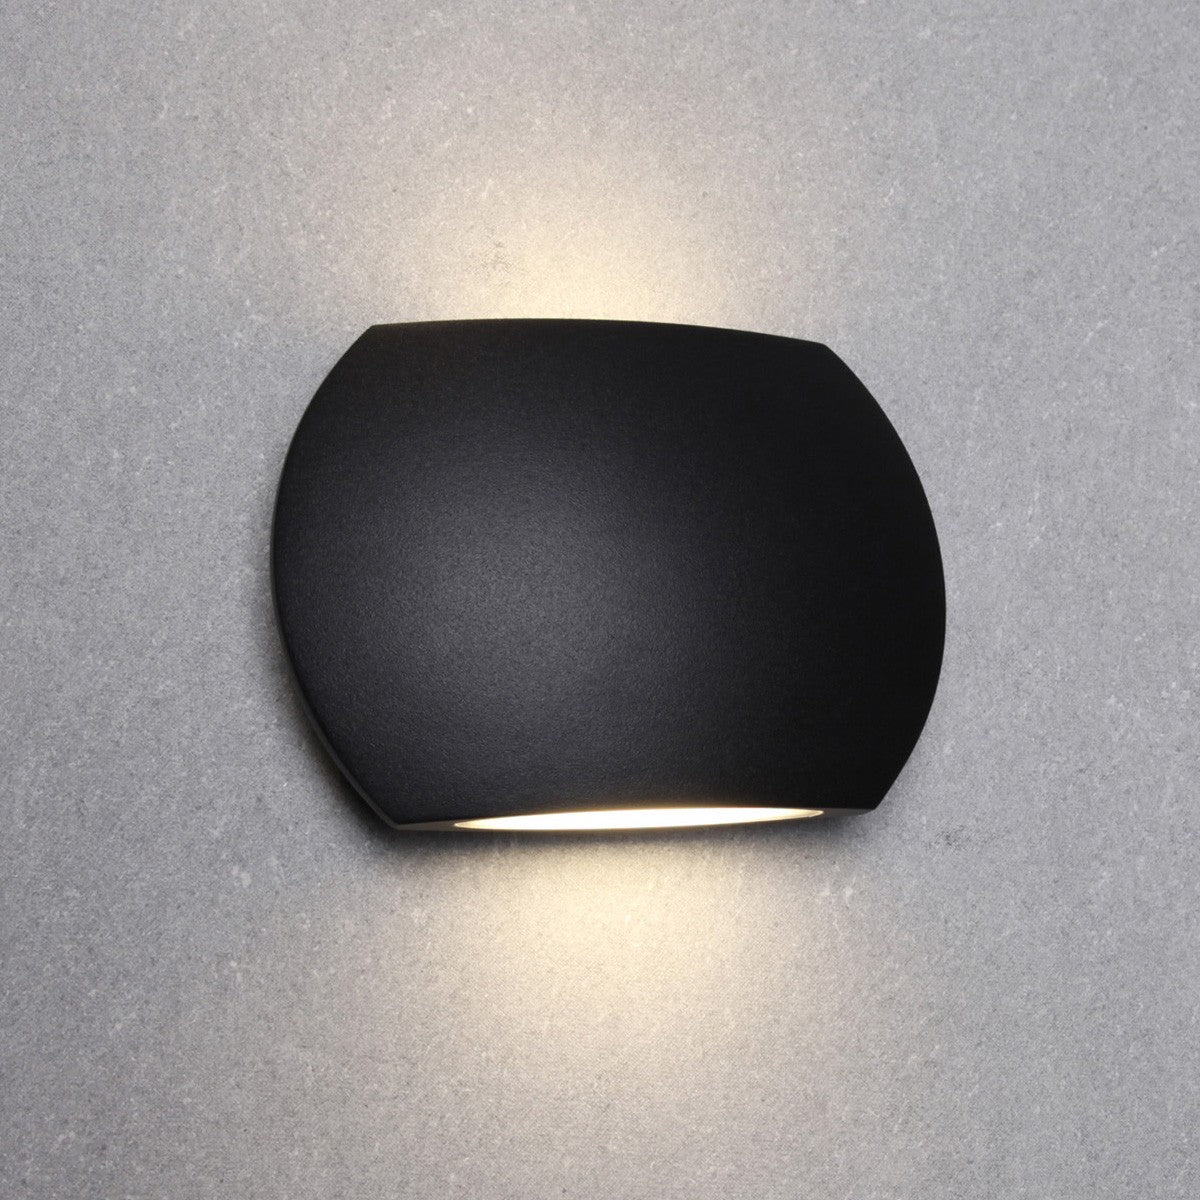 Remo IP54 Exterior Up/Down LED Wall Light, Black